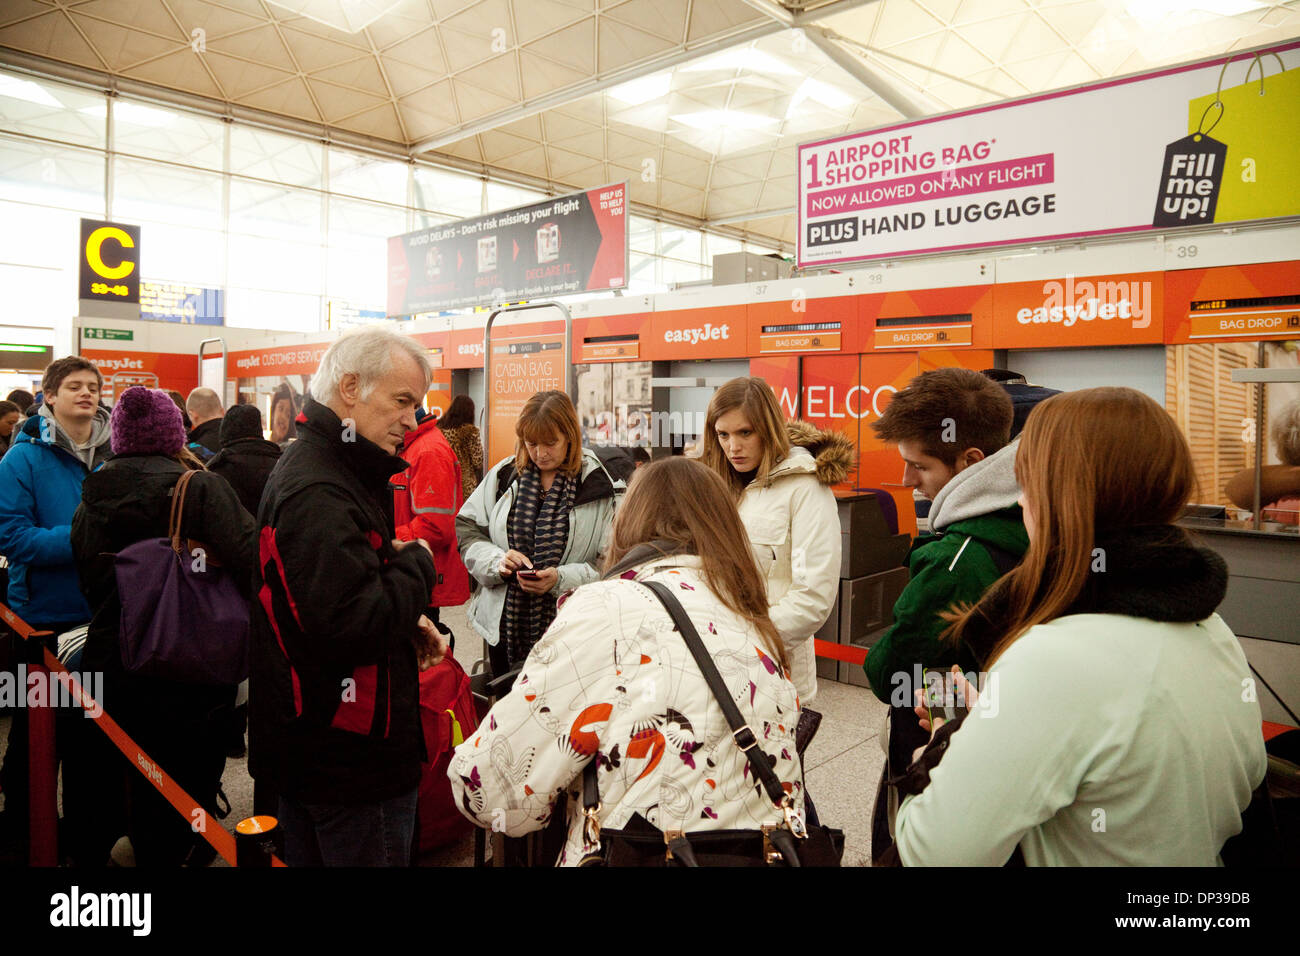 Easyjet check in area, crowded with passengers, Stansted airport, Essex, England UK Stock Photo